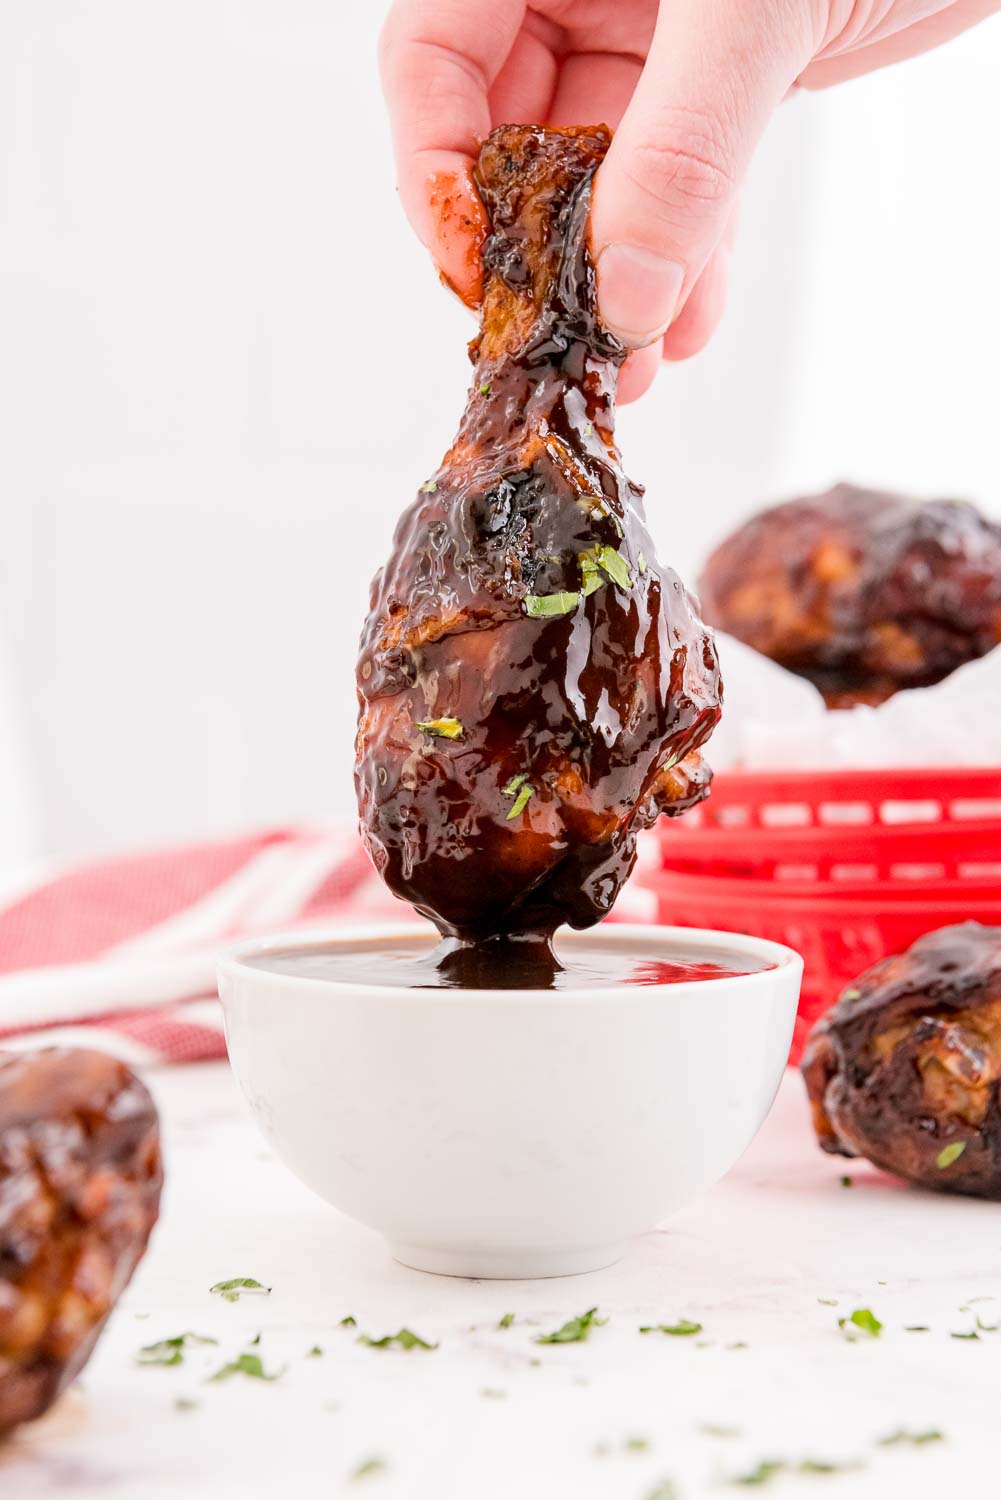 An oven baked BBQ drumstick being dipped in BBQ sauce.